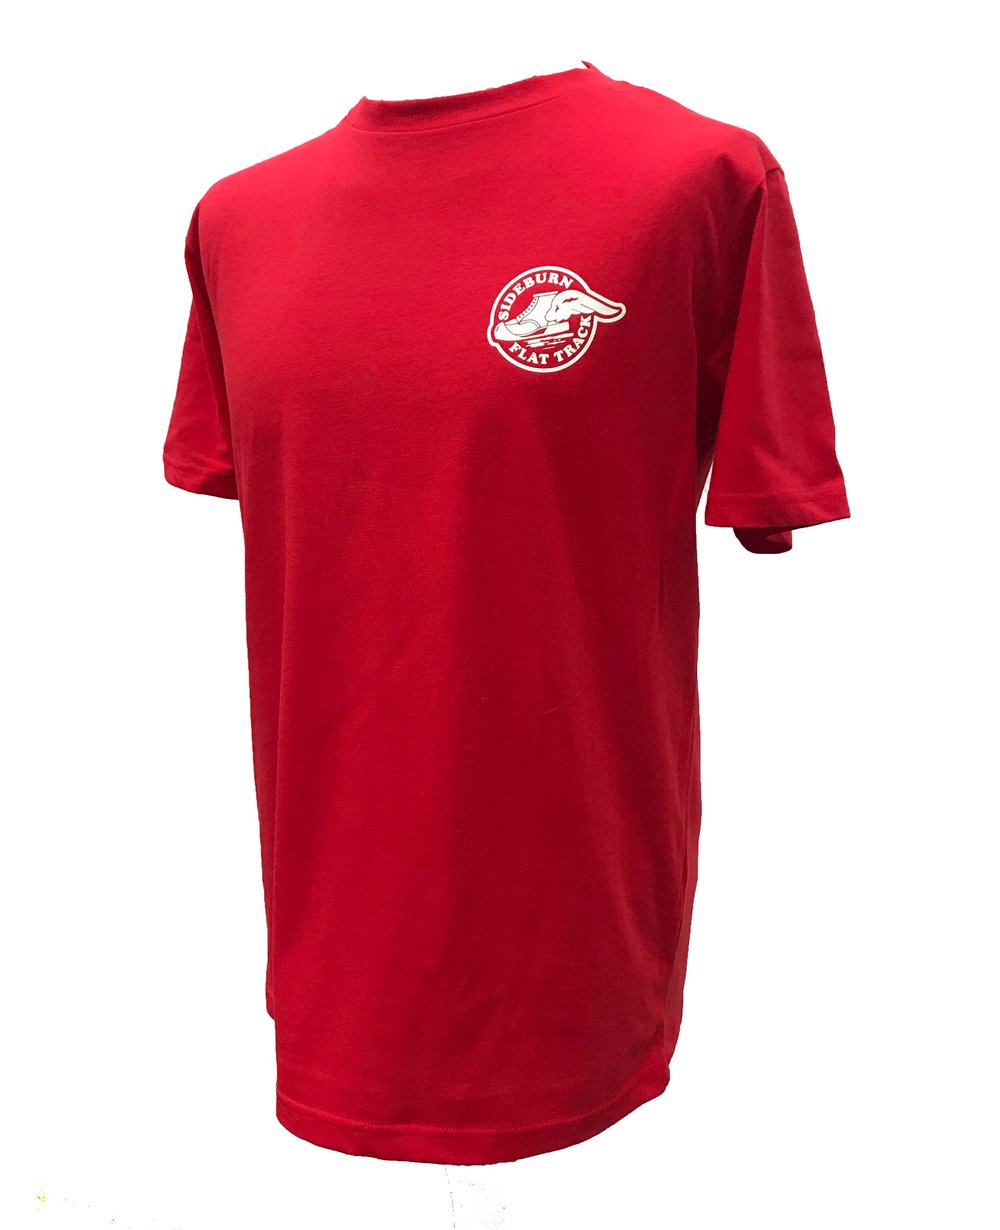 Image of Flat Track T-shirt - RED